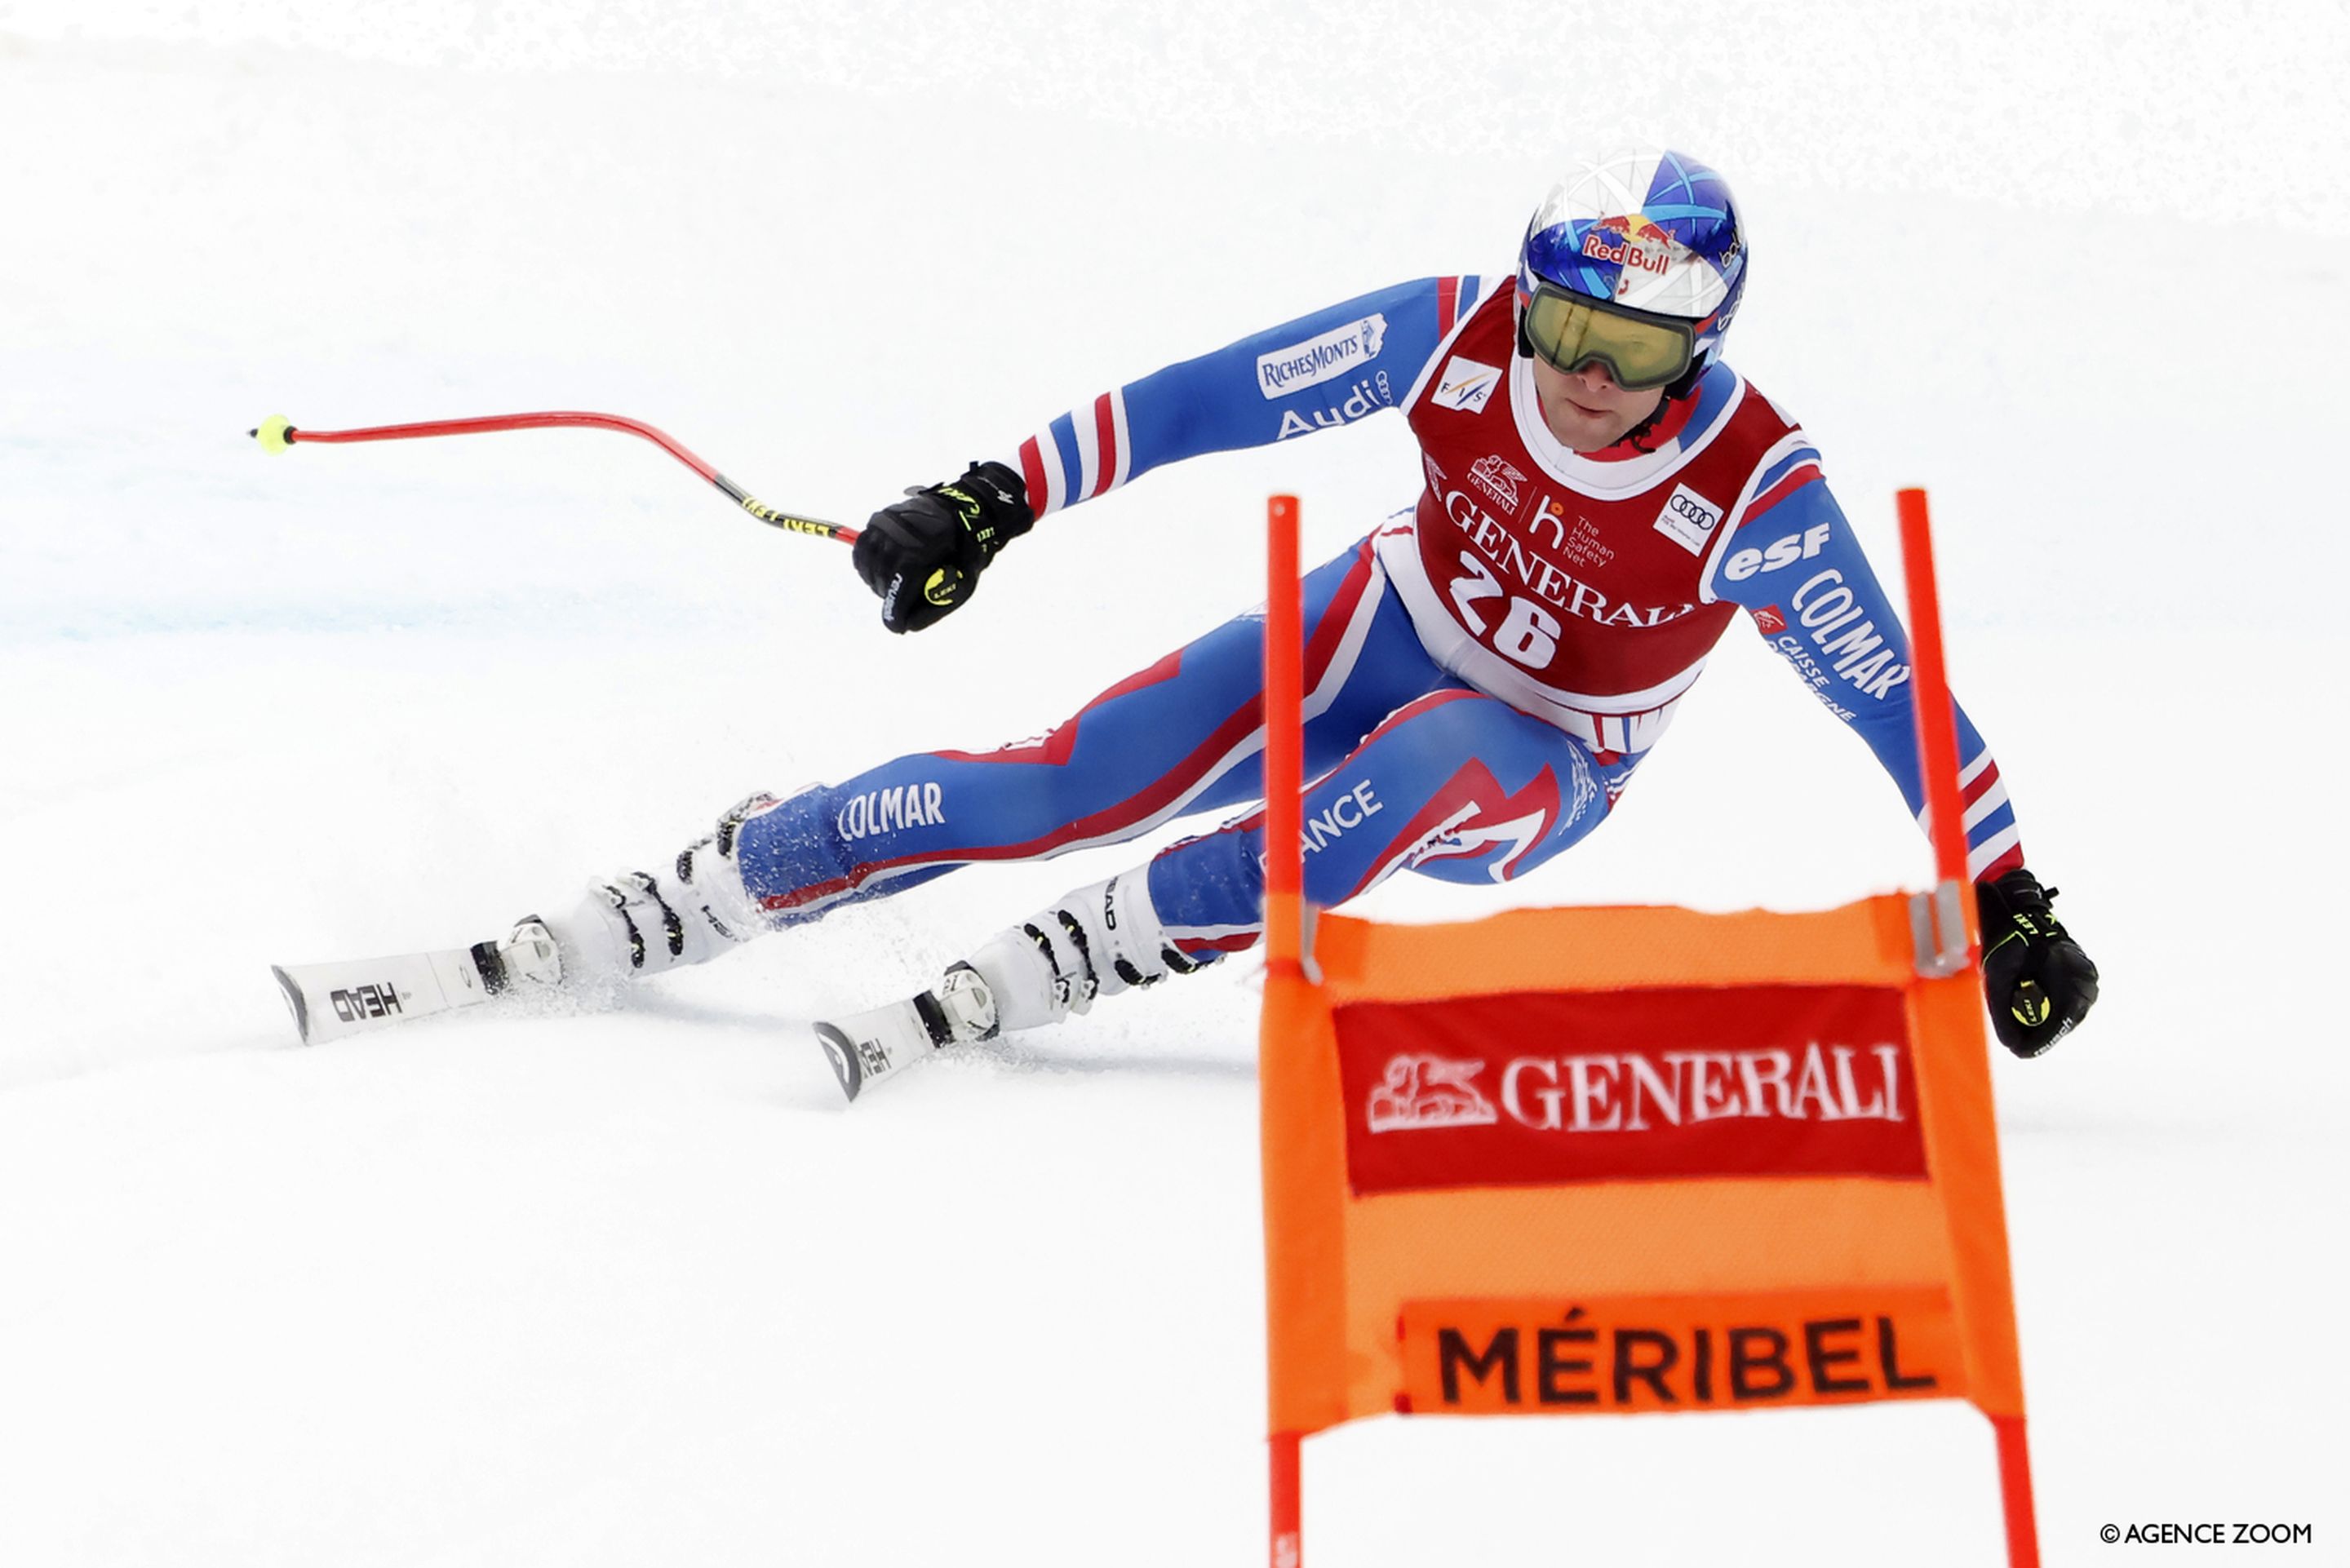 Alexis Pinturault in World Cup action in Meribel, March 2022 (Agence Zoom).